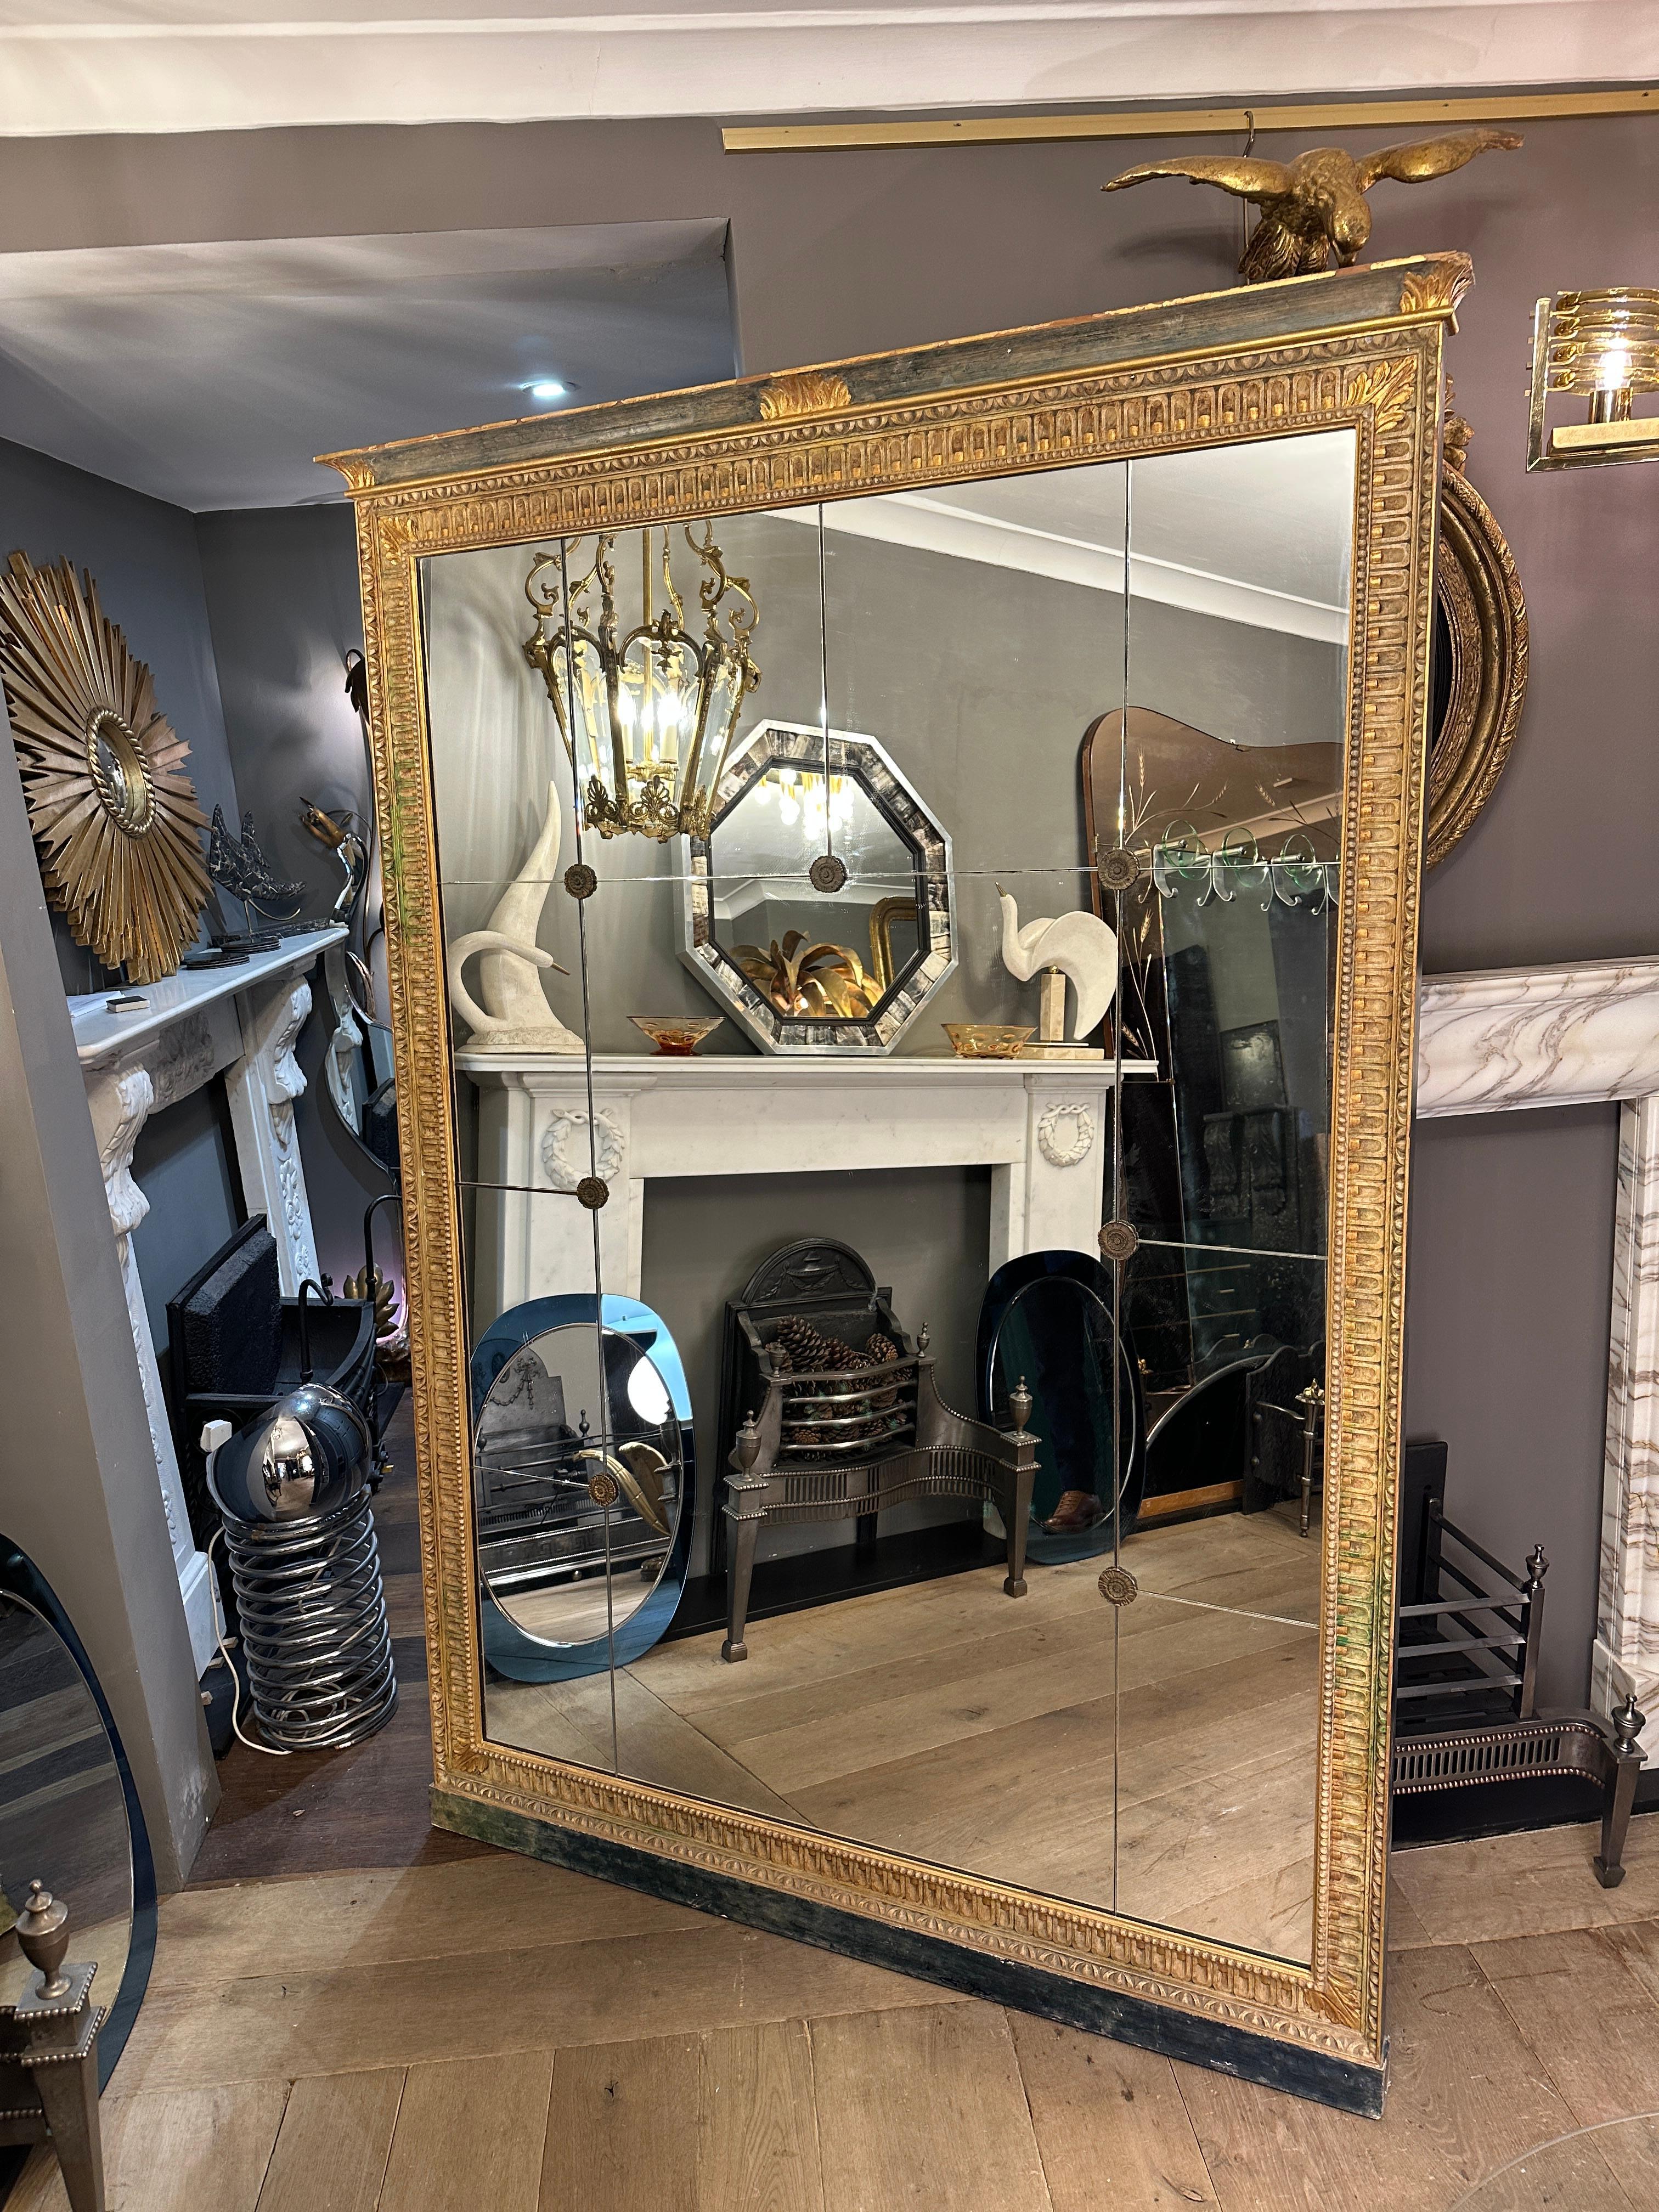 Giltwood A large French Antique Panelled Gold Gilt Mirror In The Empire Style 